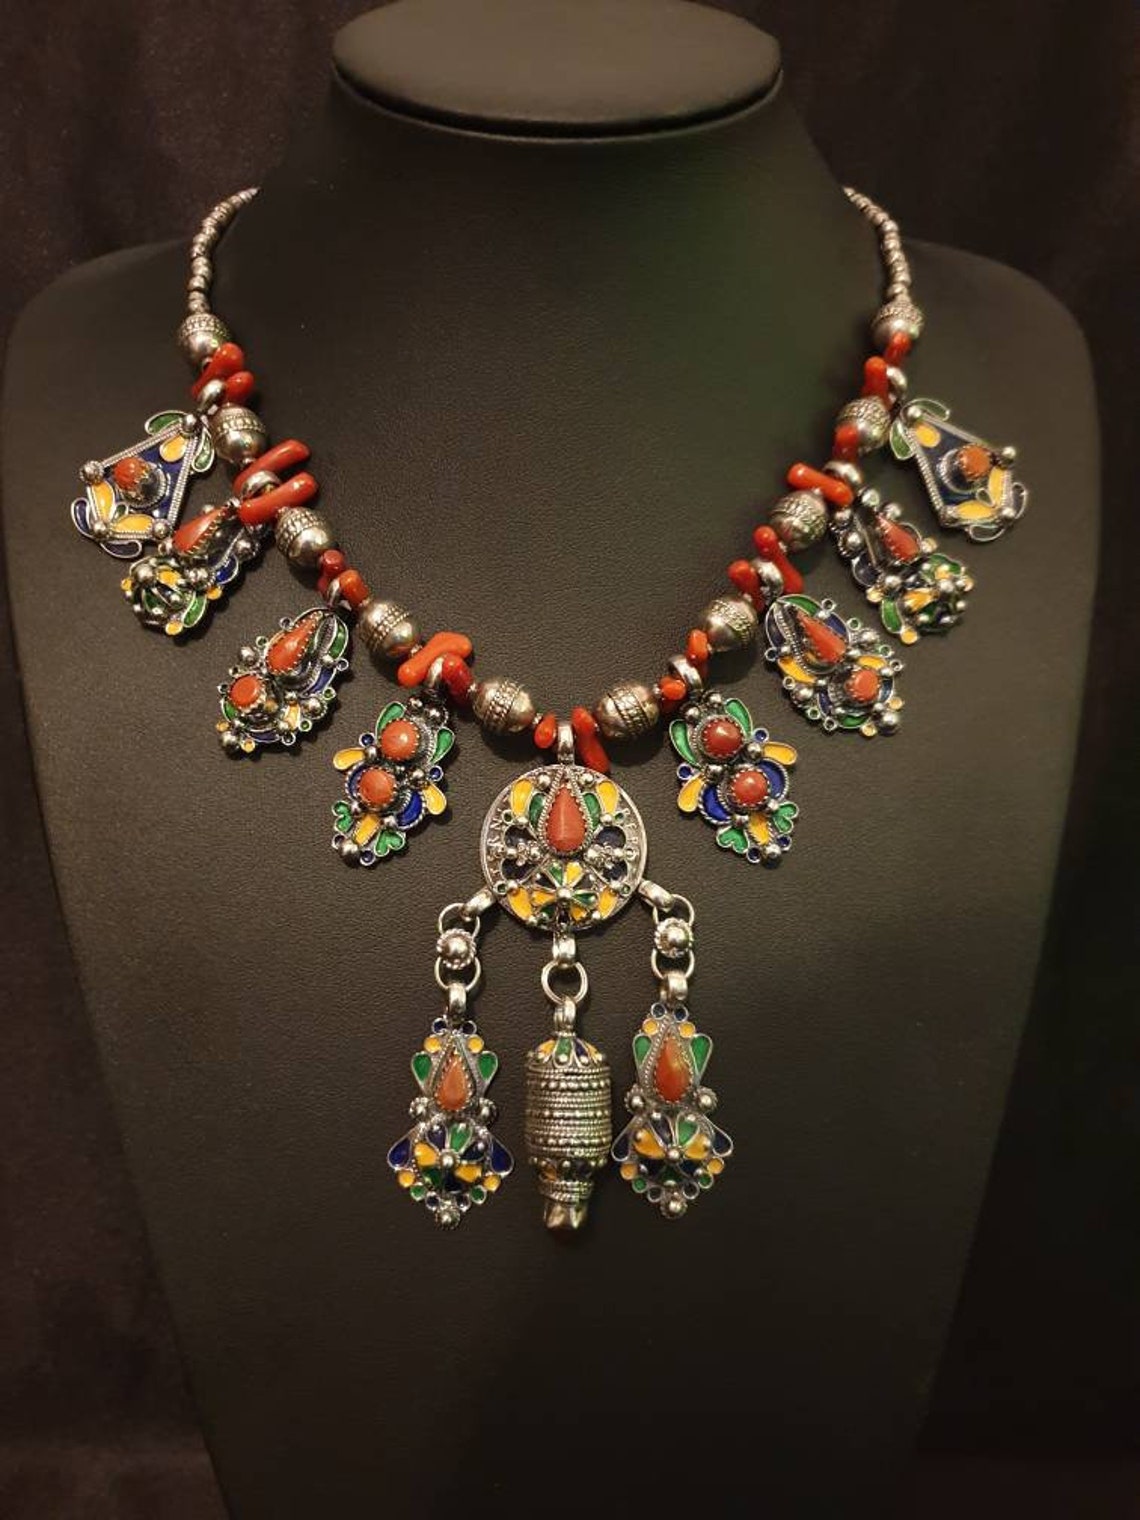 Kabyle and Berber ethnic jewelry | Etsy